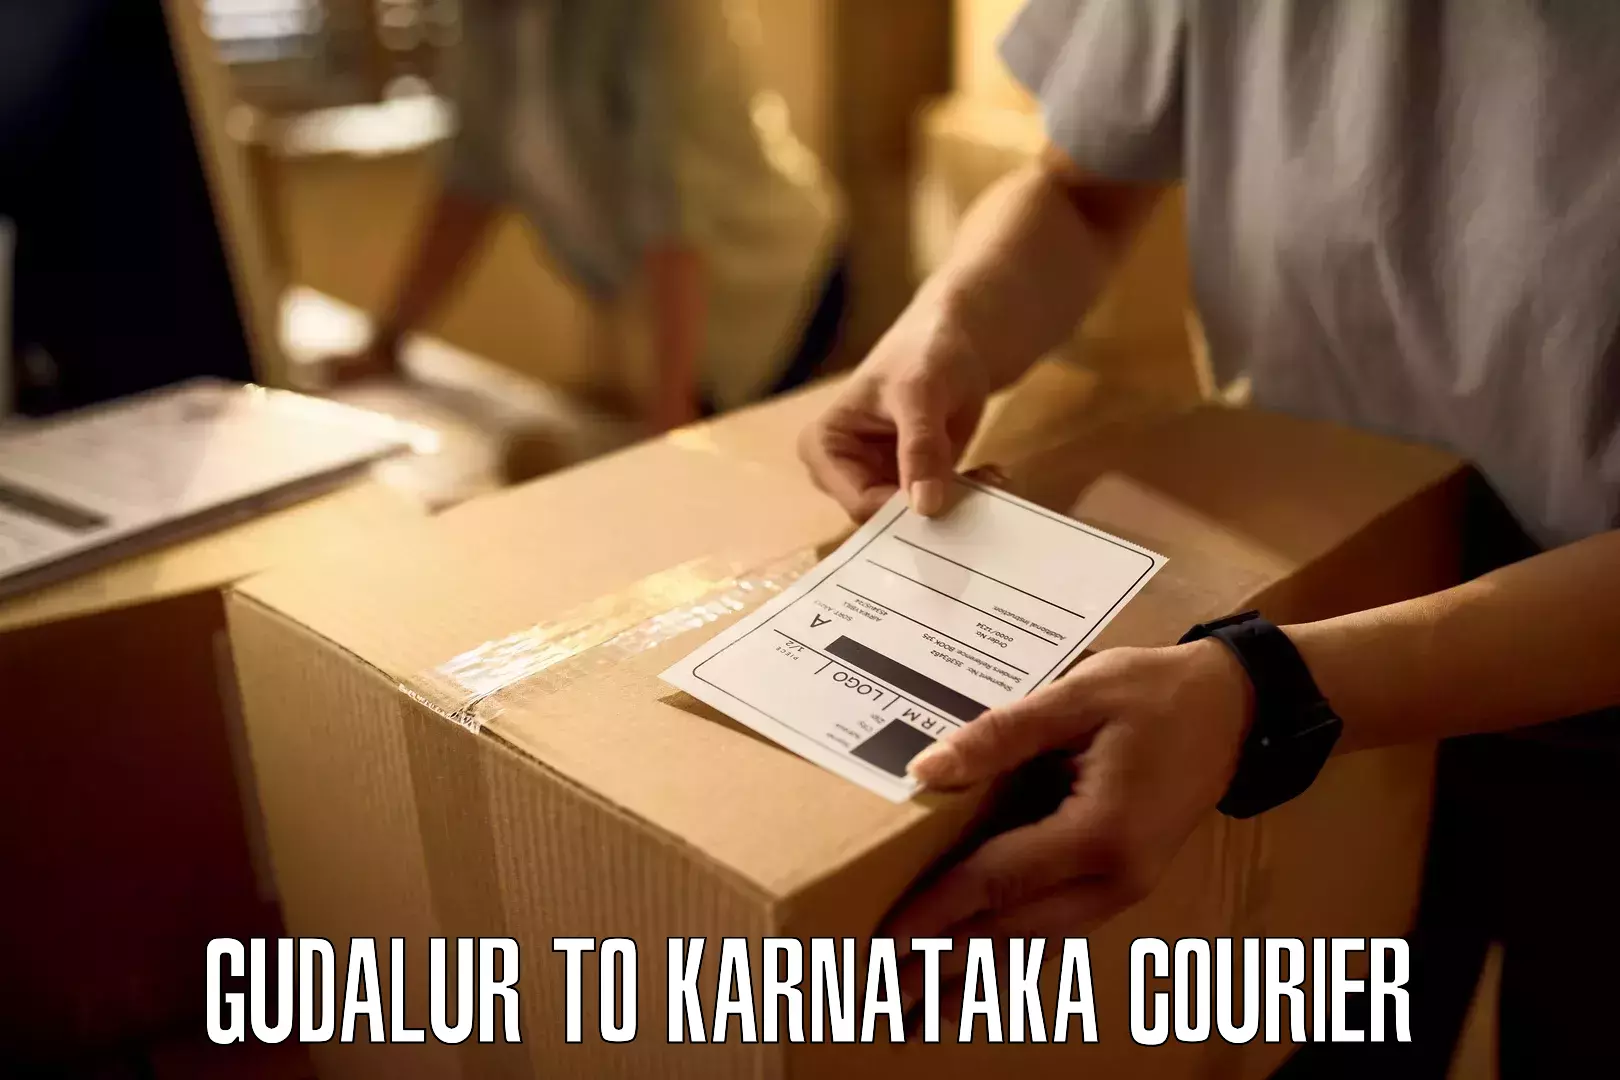 State-of-the-art courier technology Gudalur to Piriyapatna